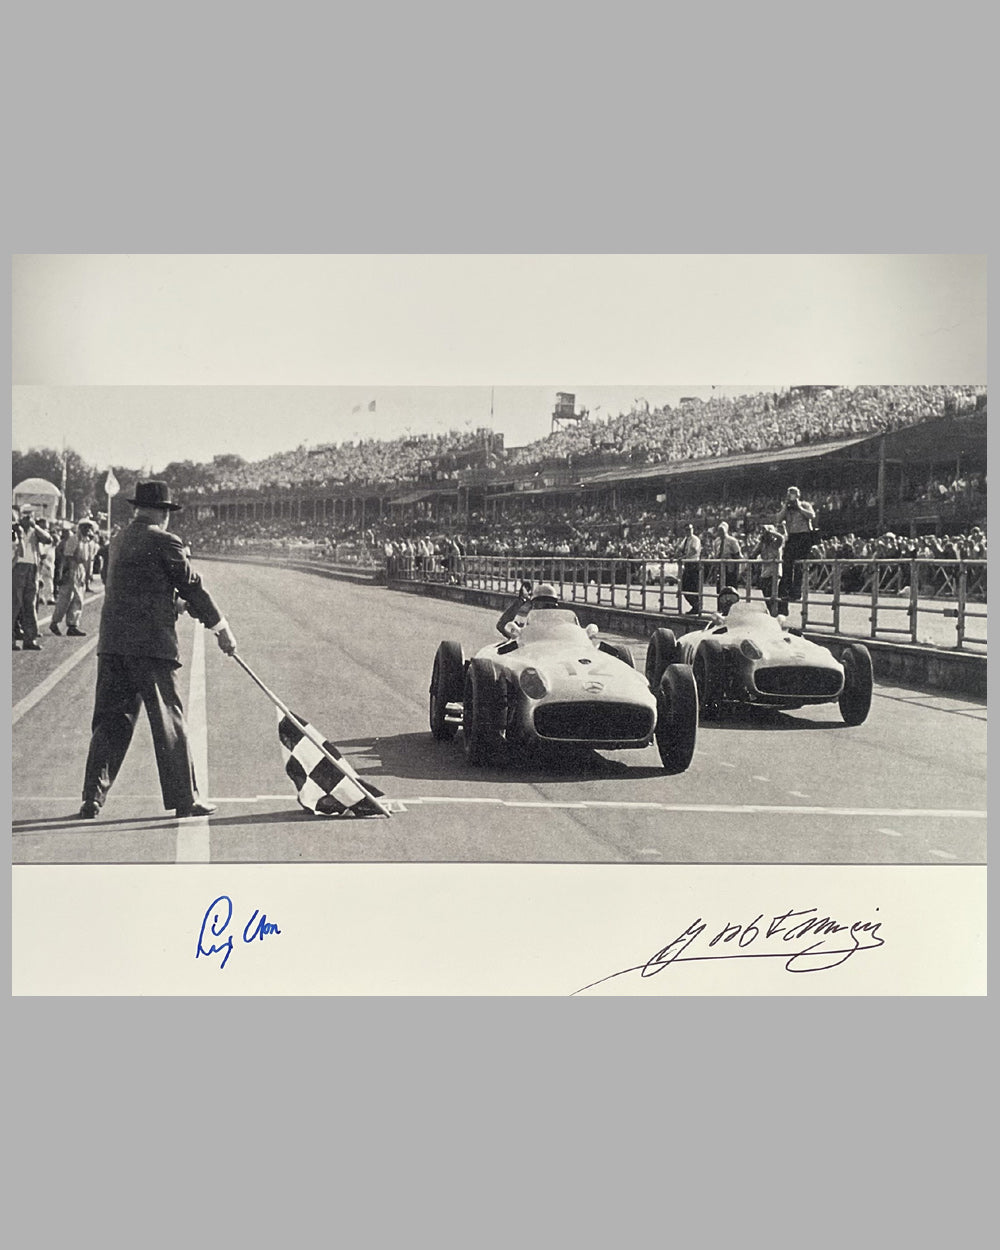 Mercedes wins the 1955 British Grand Prix photograph, autographed by Moss & Fangio